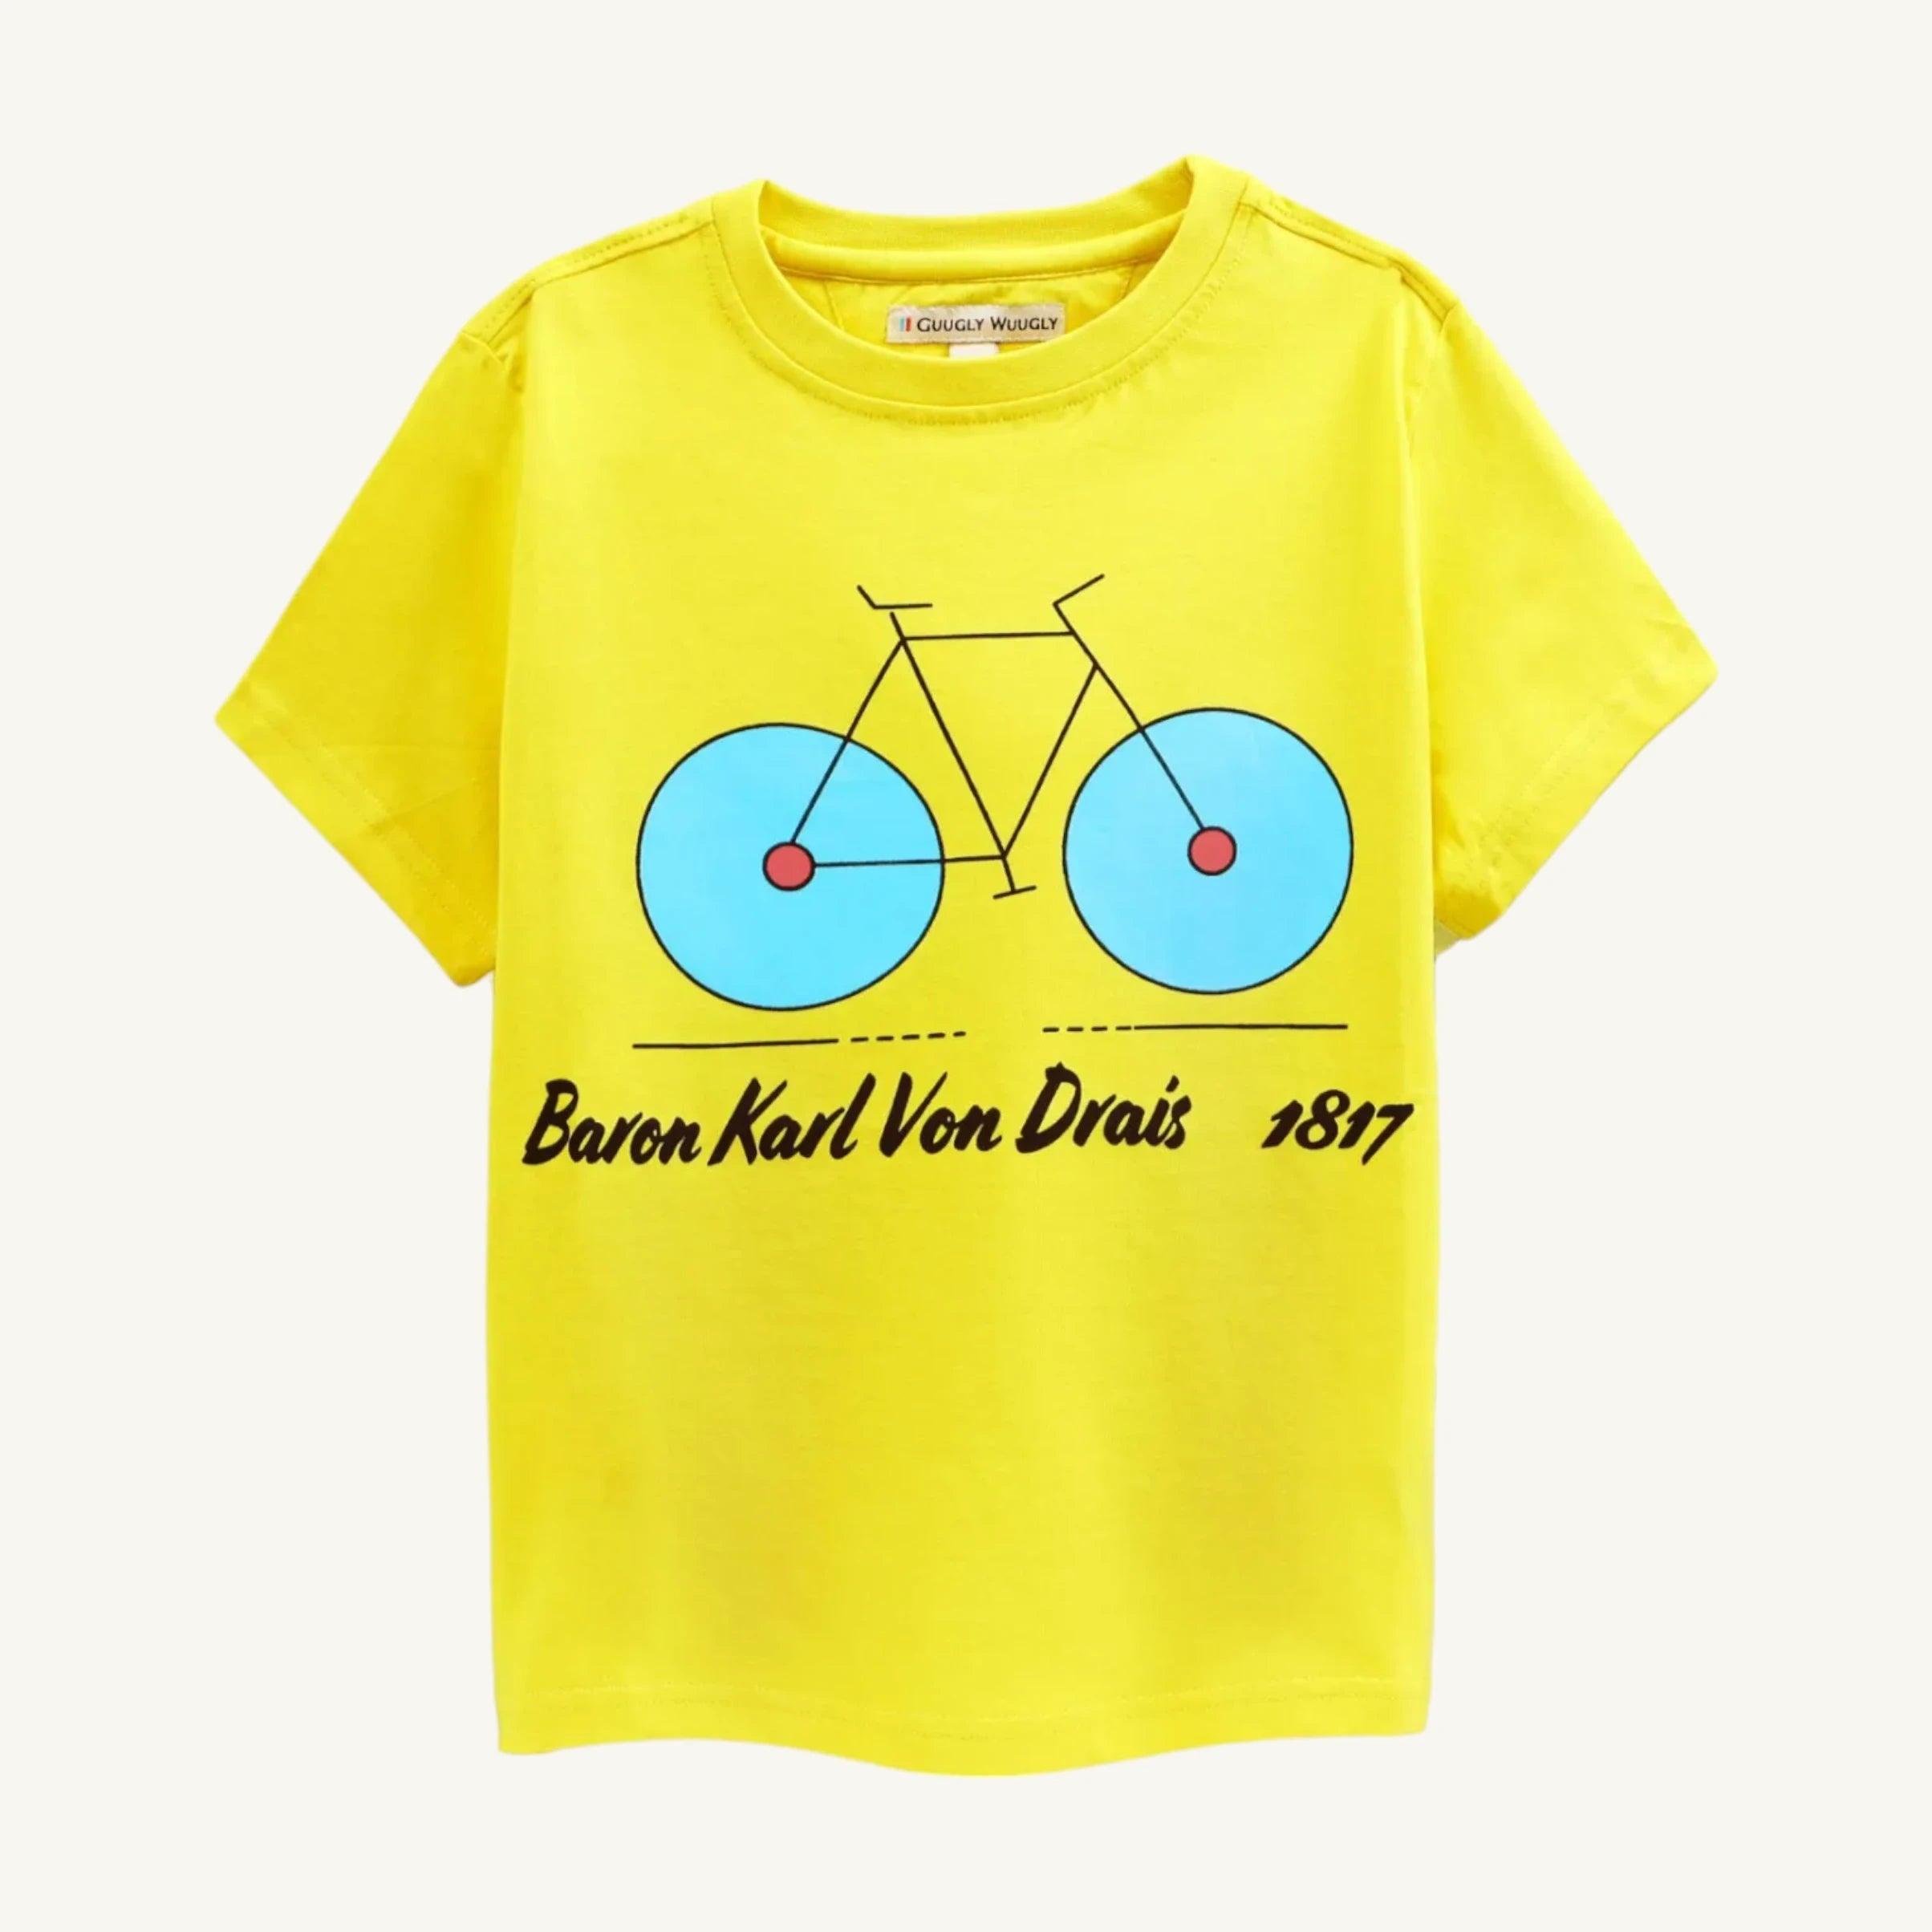 Boys Bicycle T-shirt - Guugly Wuugly